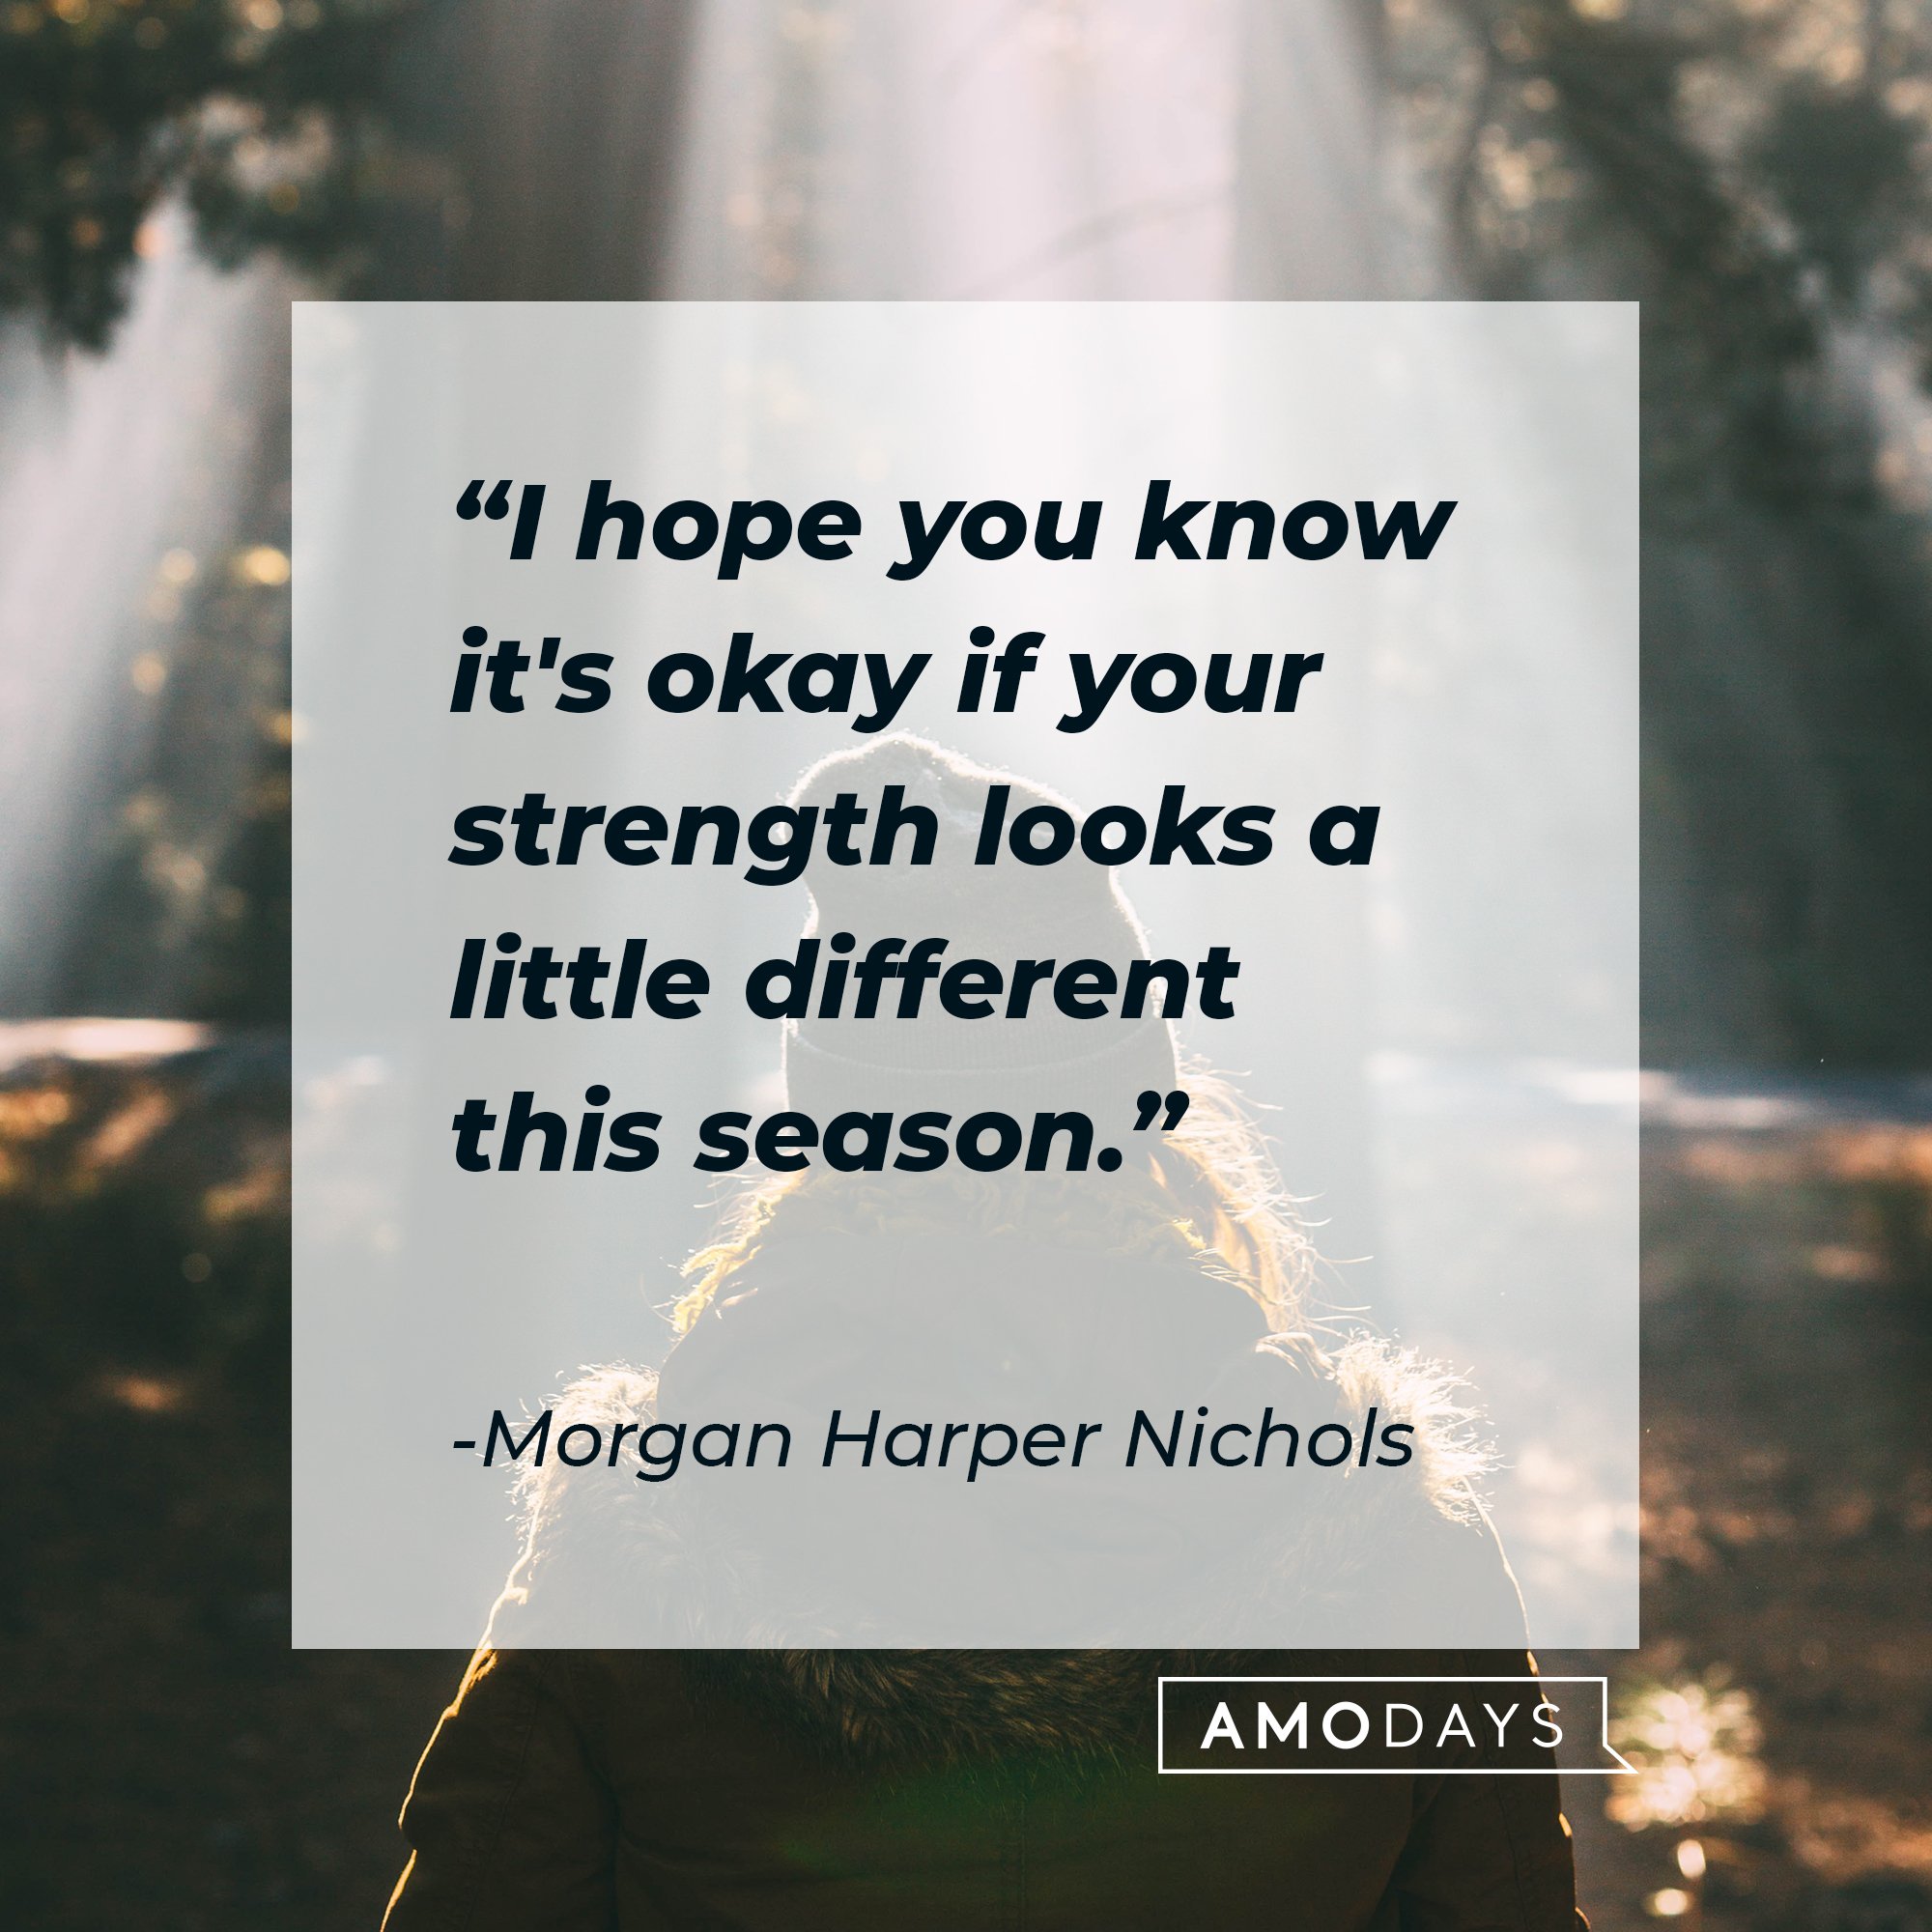 Morgan Harper Nichols’ quote: "I hope you know it's okay if your strength looks a little different this season." | Image: AmoDays